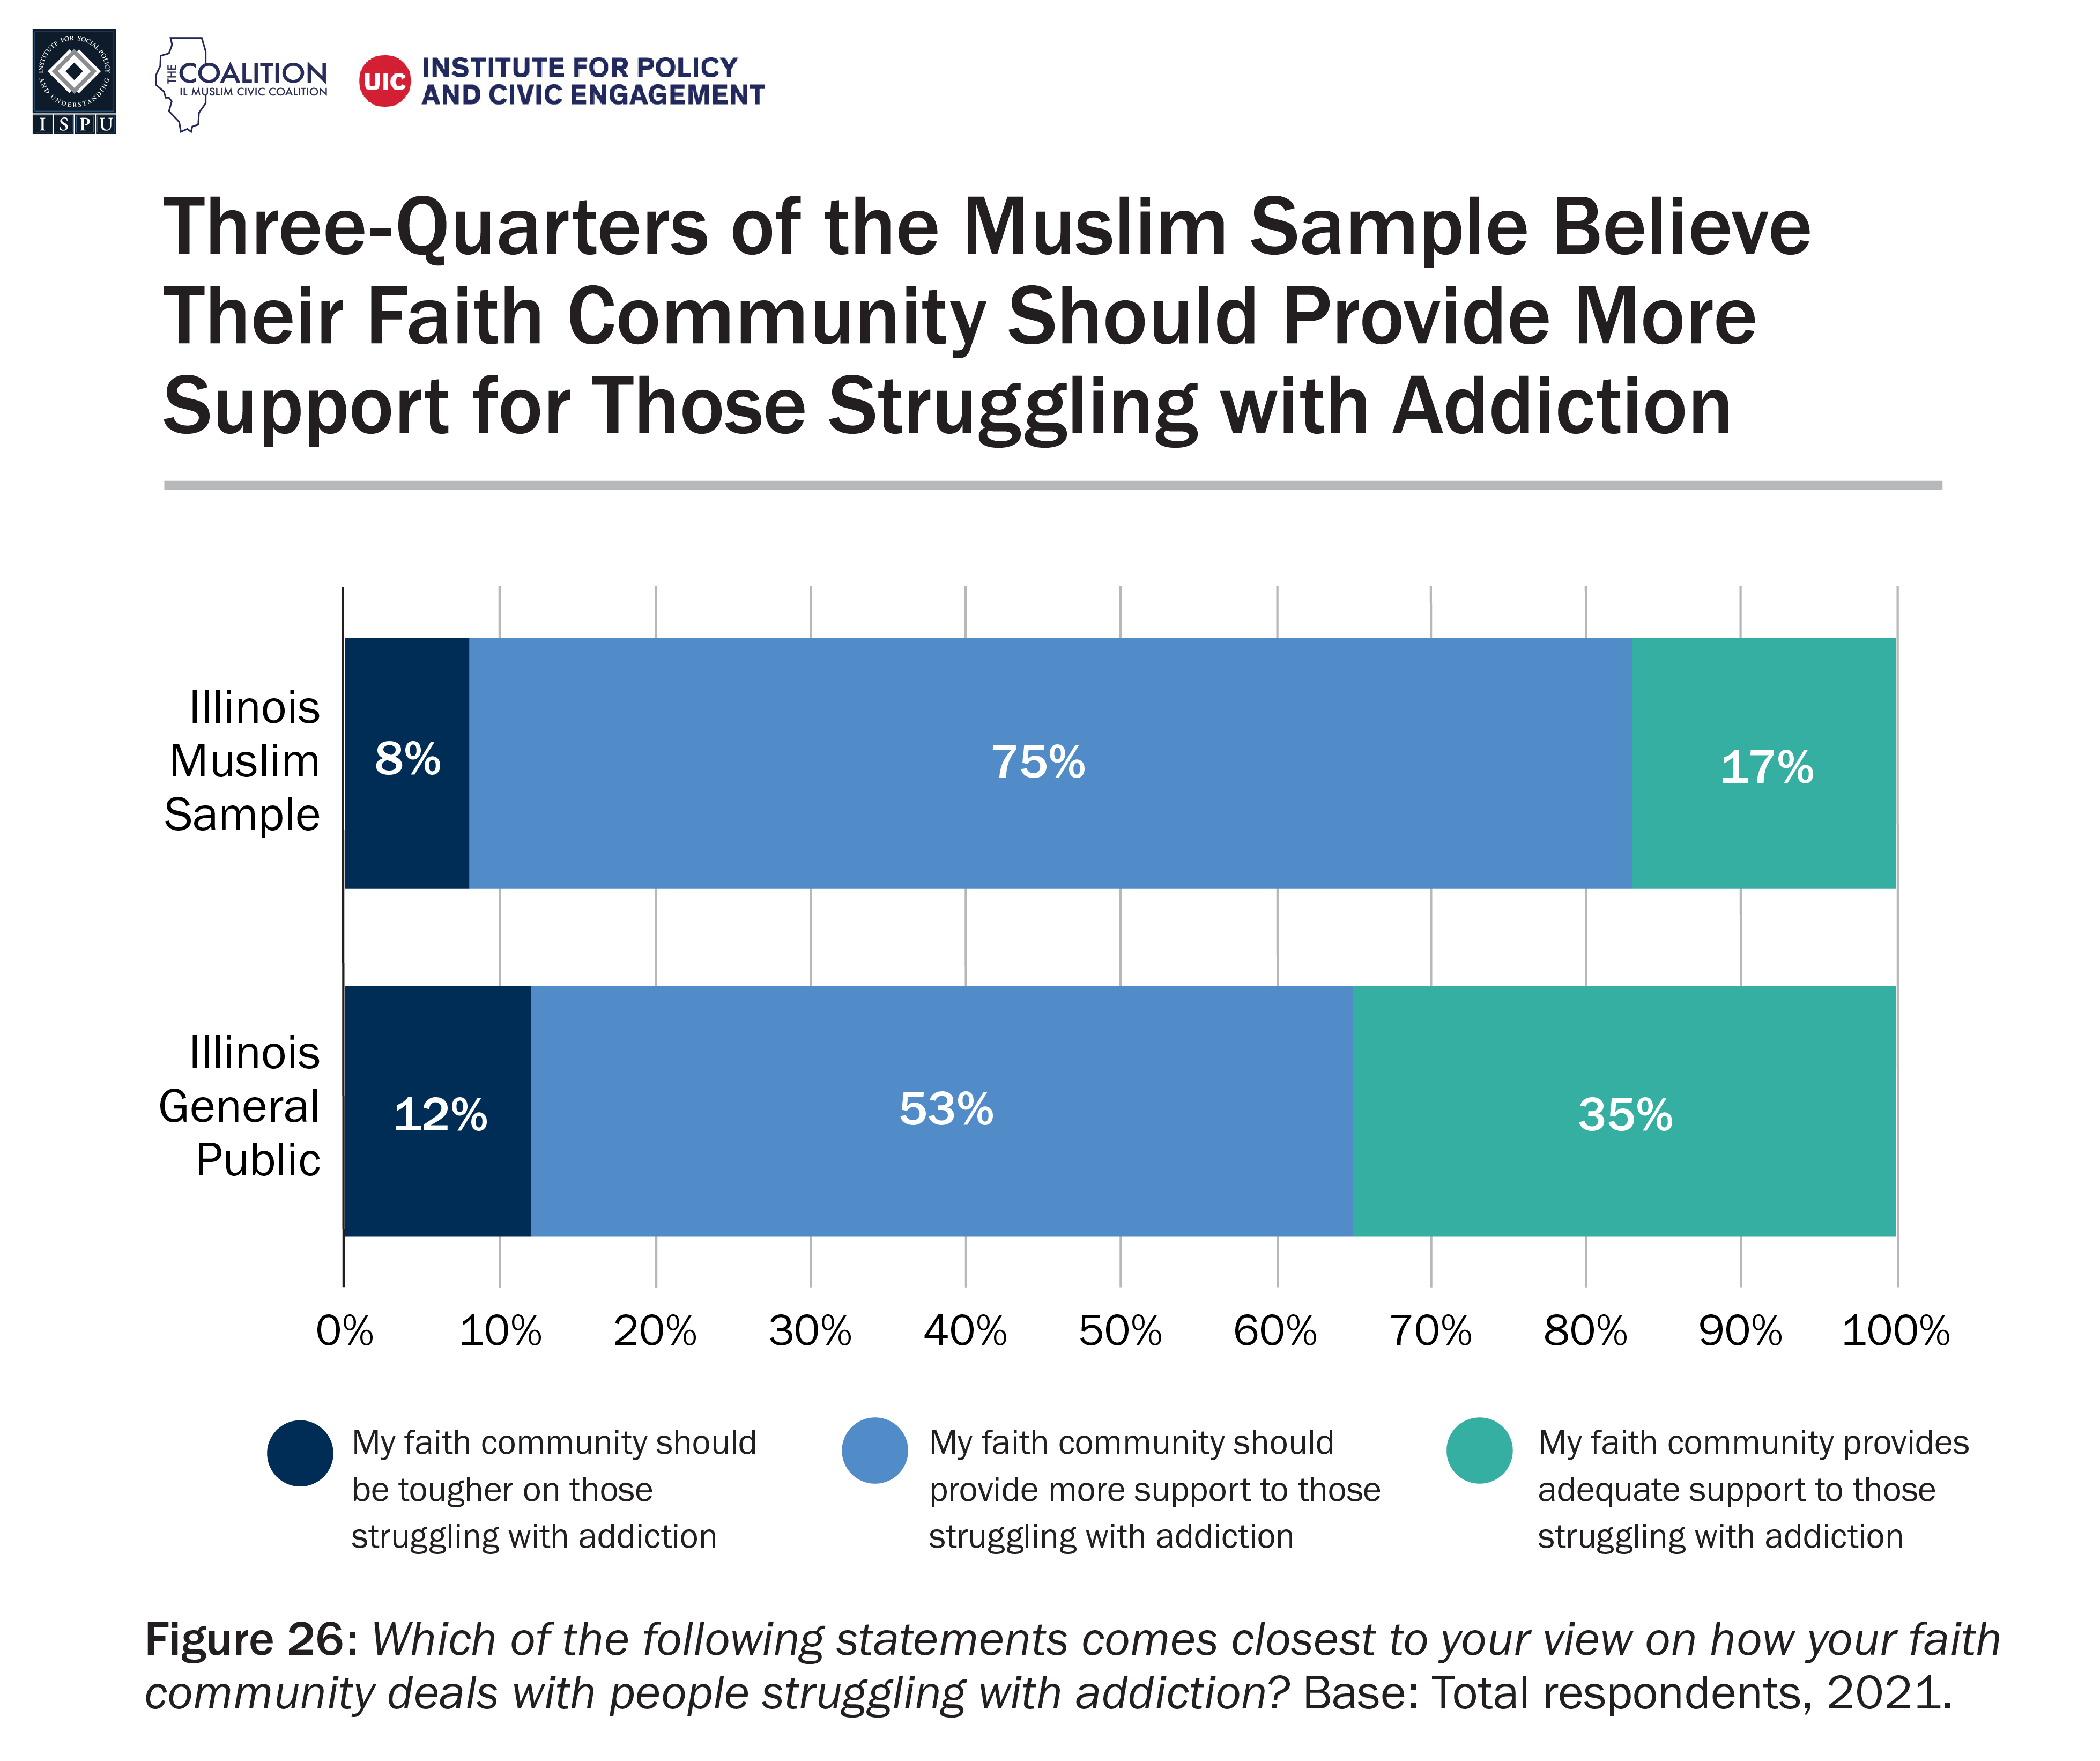 A bar graph showing opinions about the level of support the faith community should provide to those struggling with addiction among Illinois Muslim sample and Illinois general public